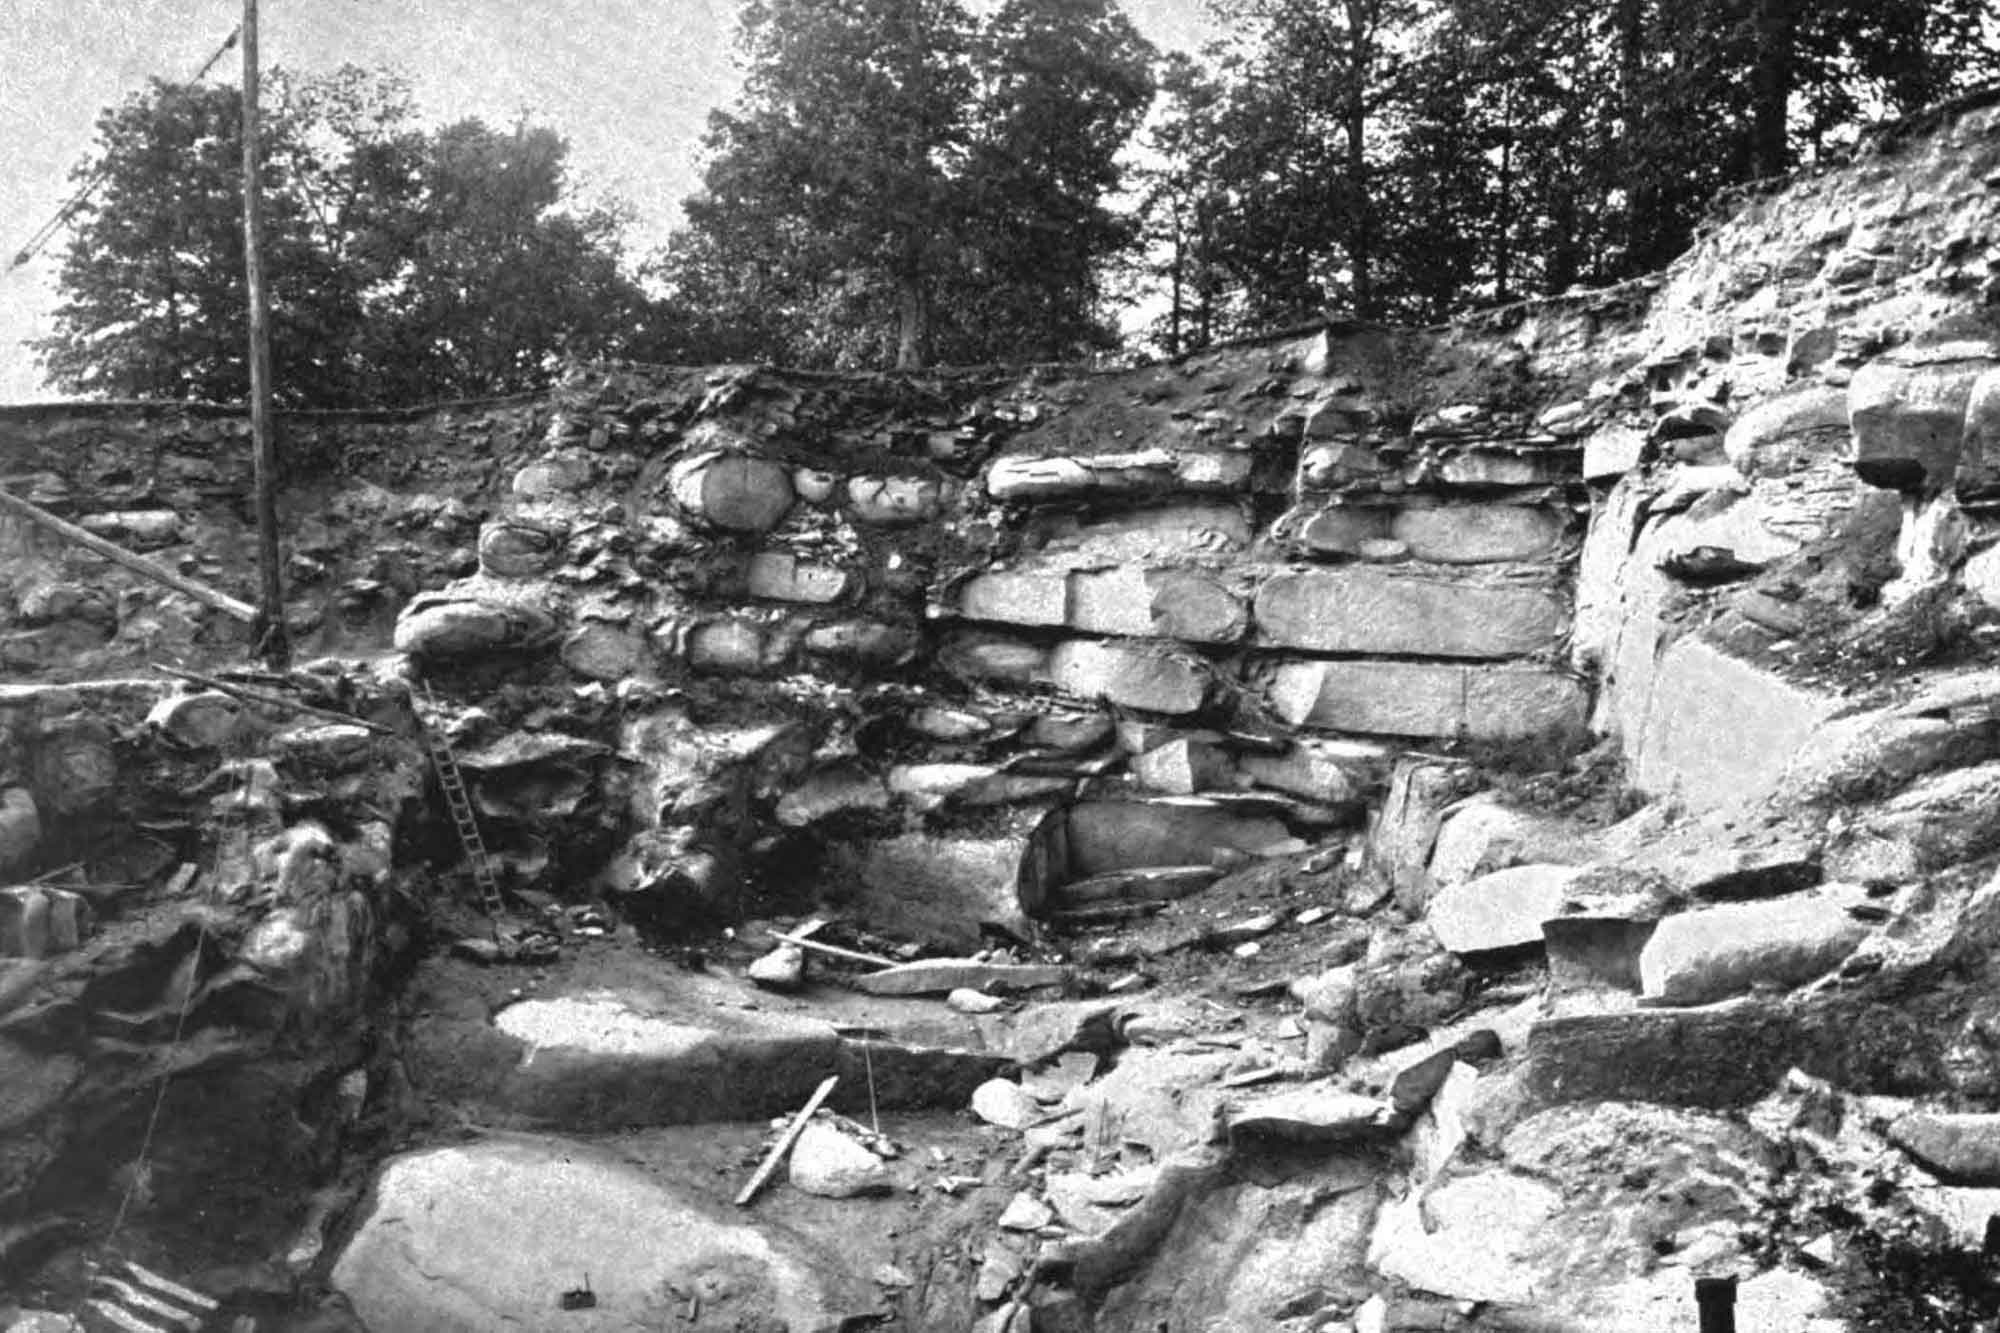 Historic photograph of a quarry operation that mined Woodstock Quartz Monzonite.